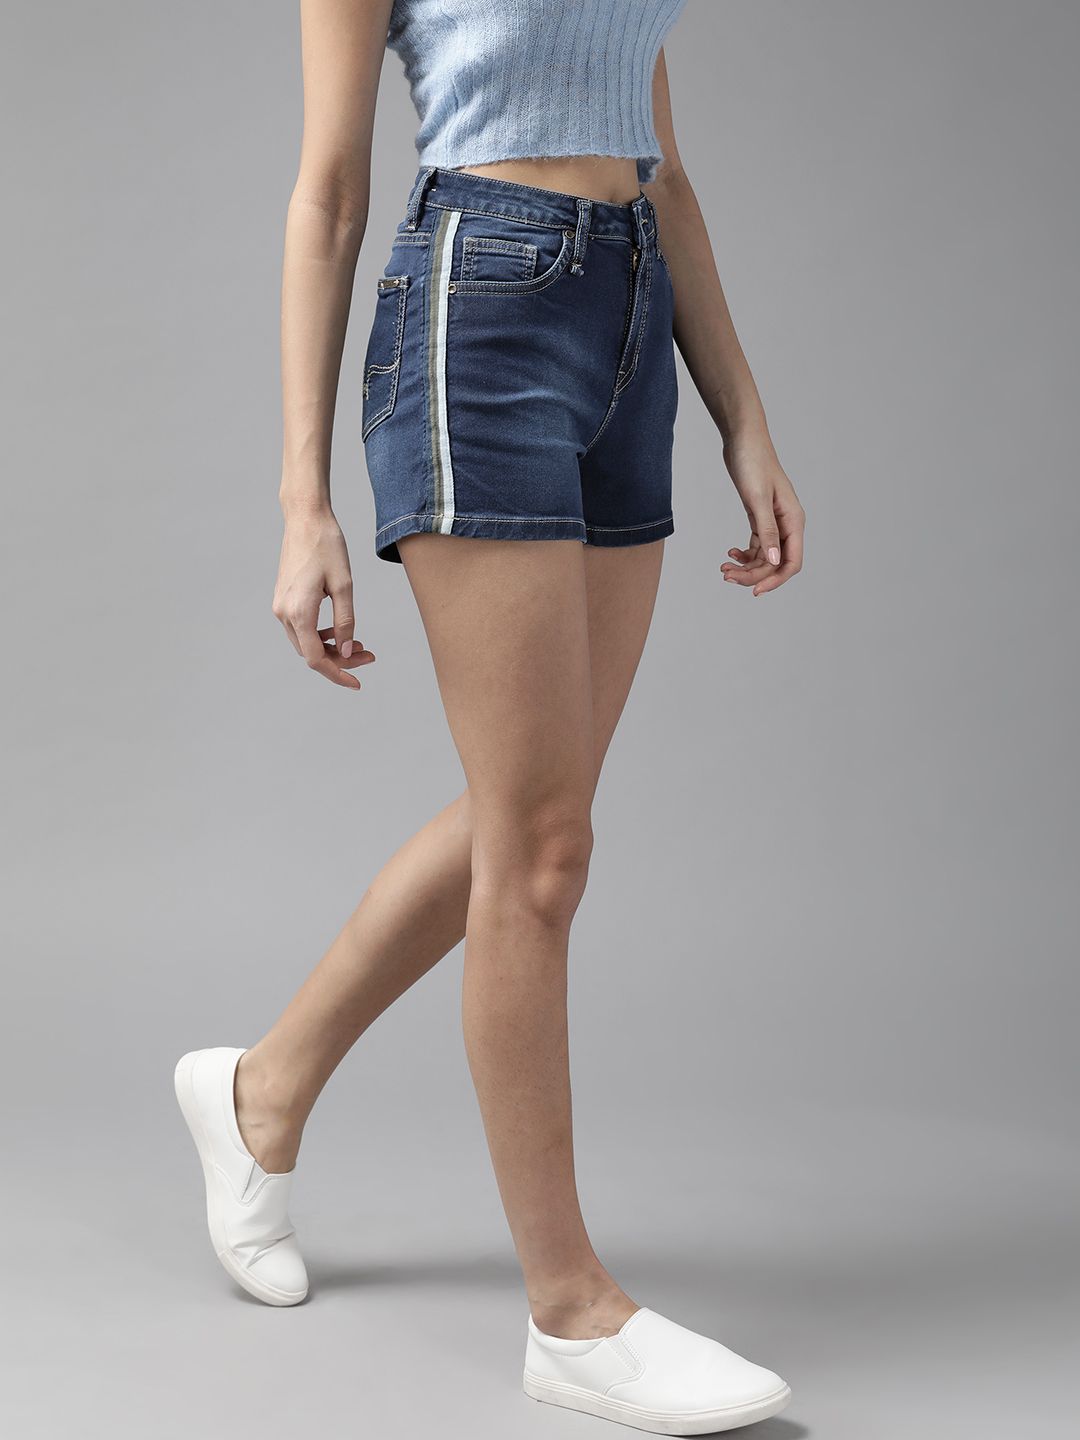 The Roadster Lifestyle Co Women Navy Blue Solid Regular Fit Denim Shorts With Striped Taping Price in India